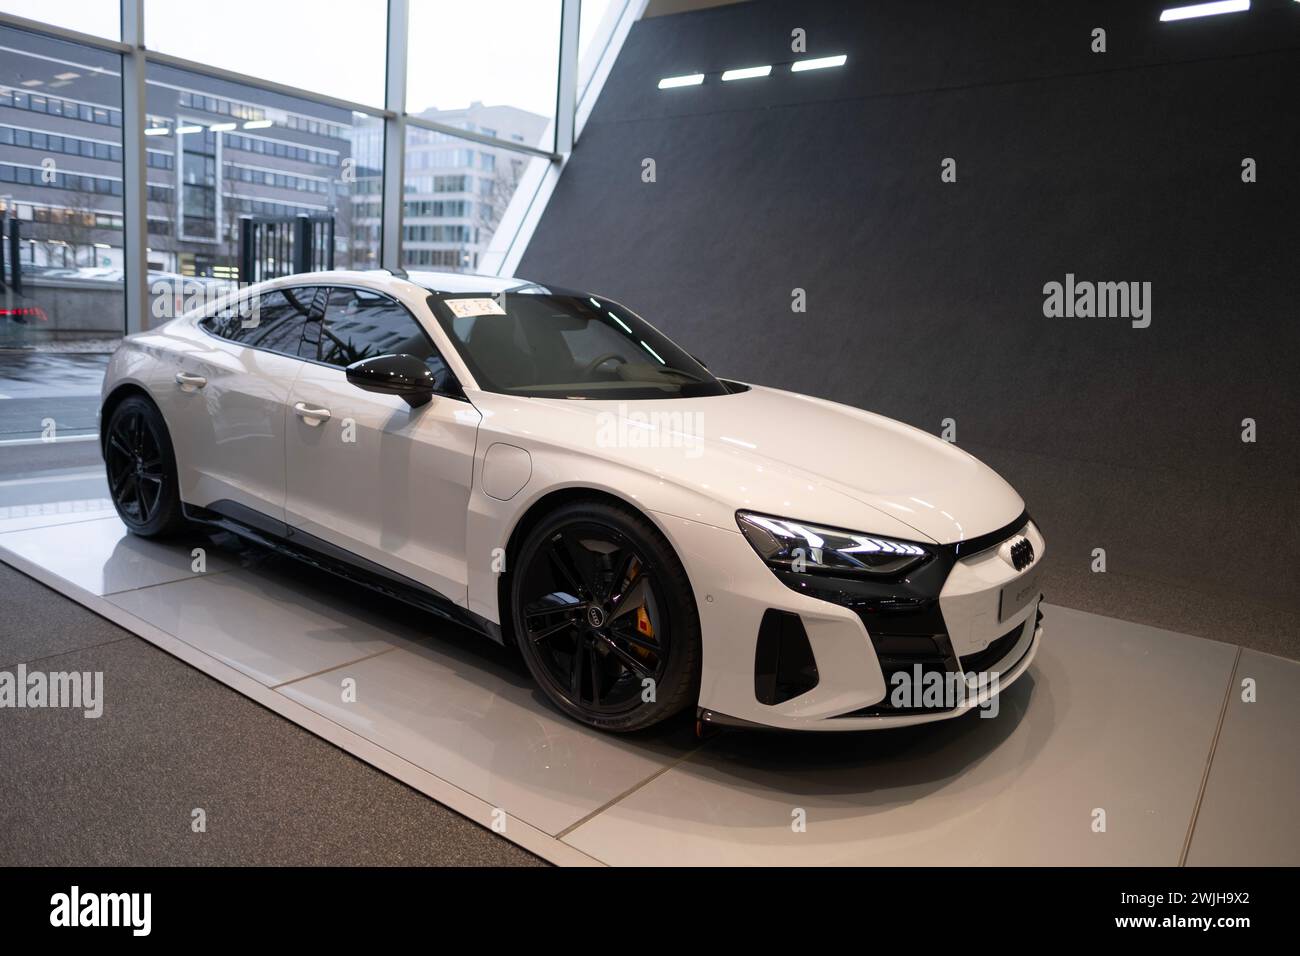 white new Luxury Electric Car Audi e-tron GT, limousine, four-door coupe in showroom, Automotive Innovation in automotive industry, Future Mobility sh Stock Photo